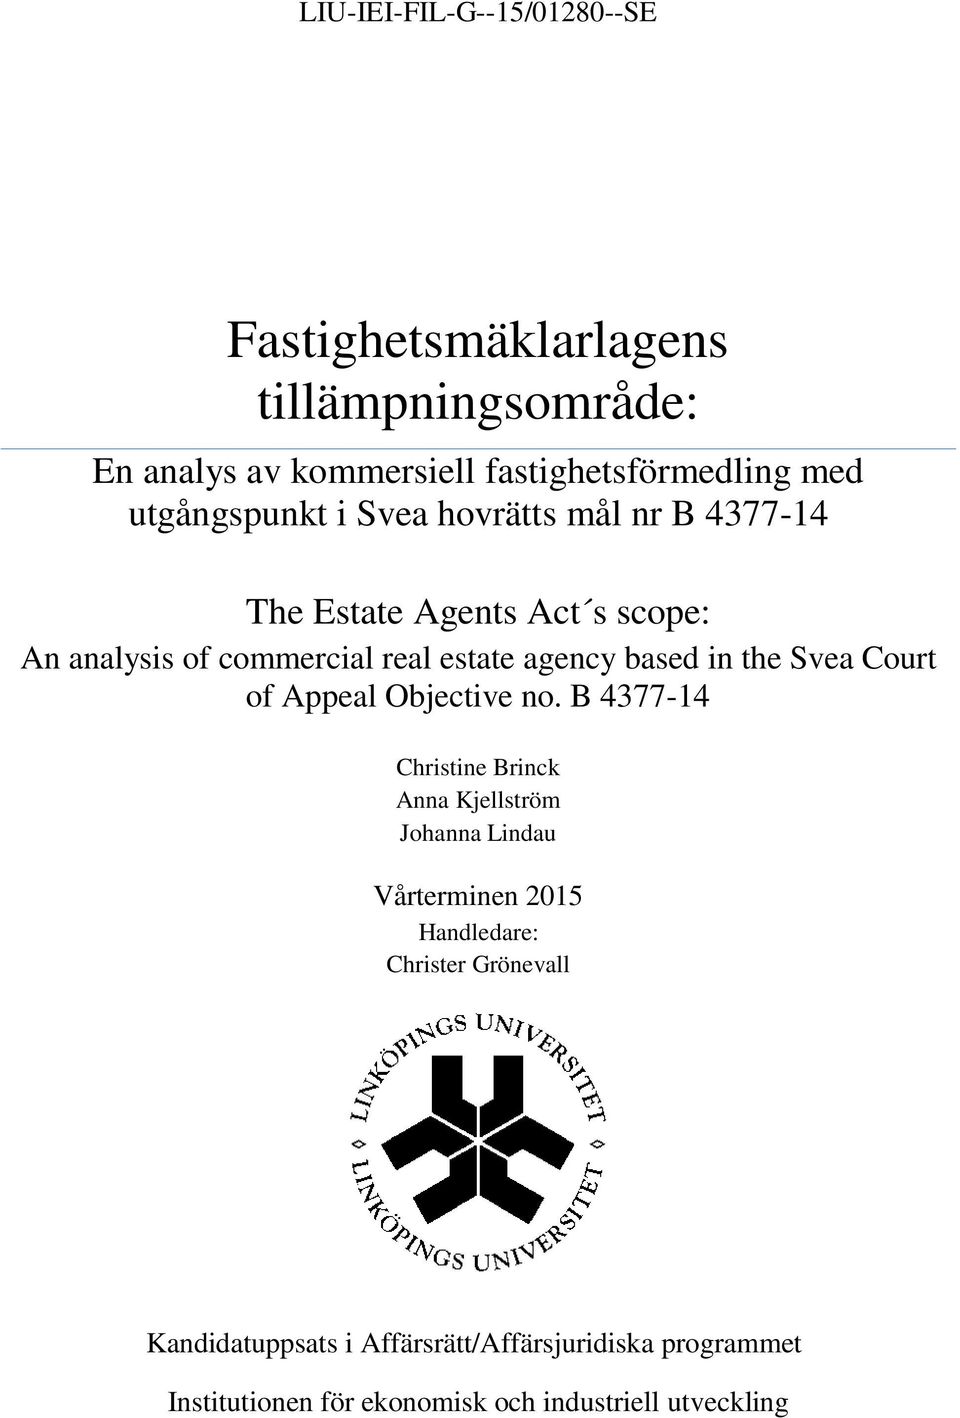 based in the Svea Court of Appeal Objective no.